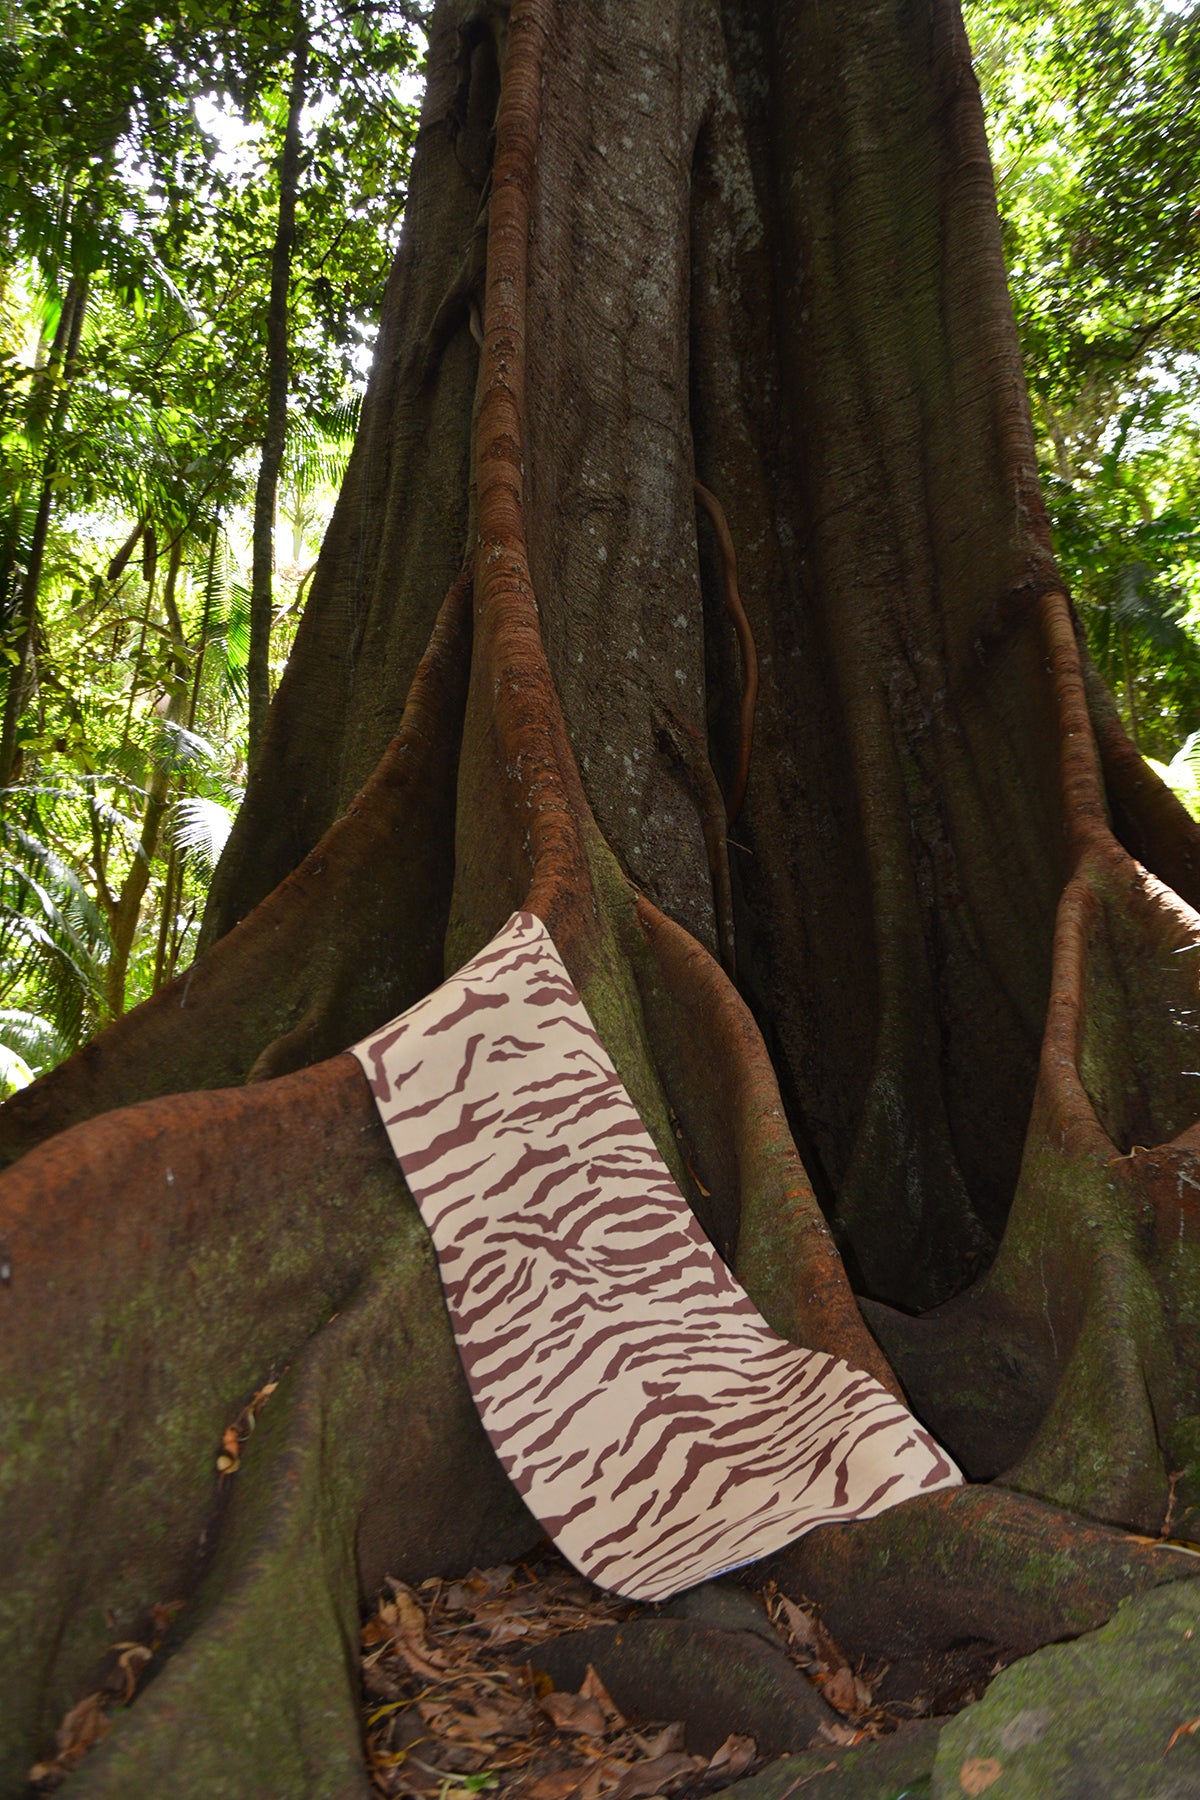 Yoga mat draped over a tree root